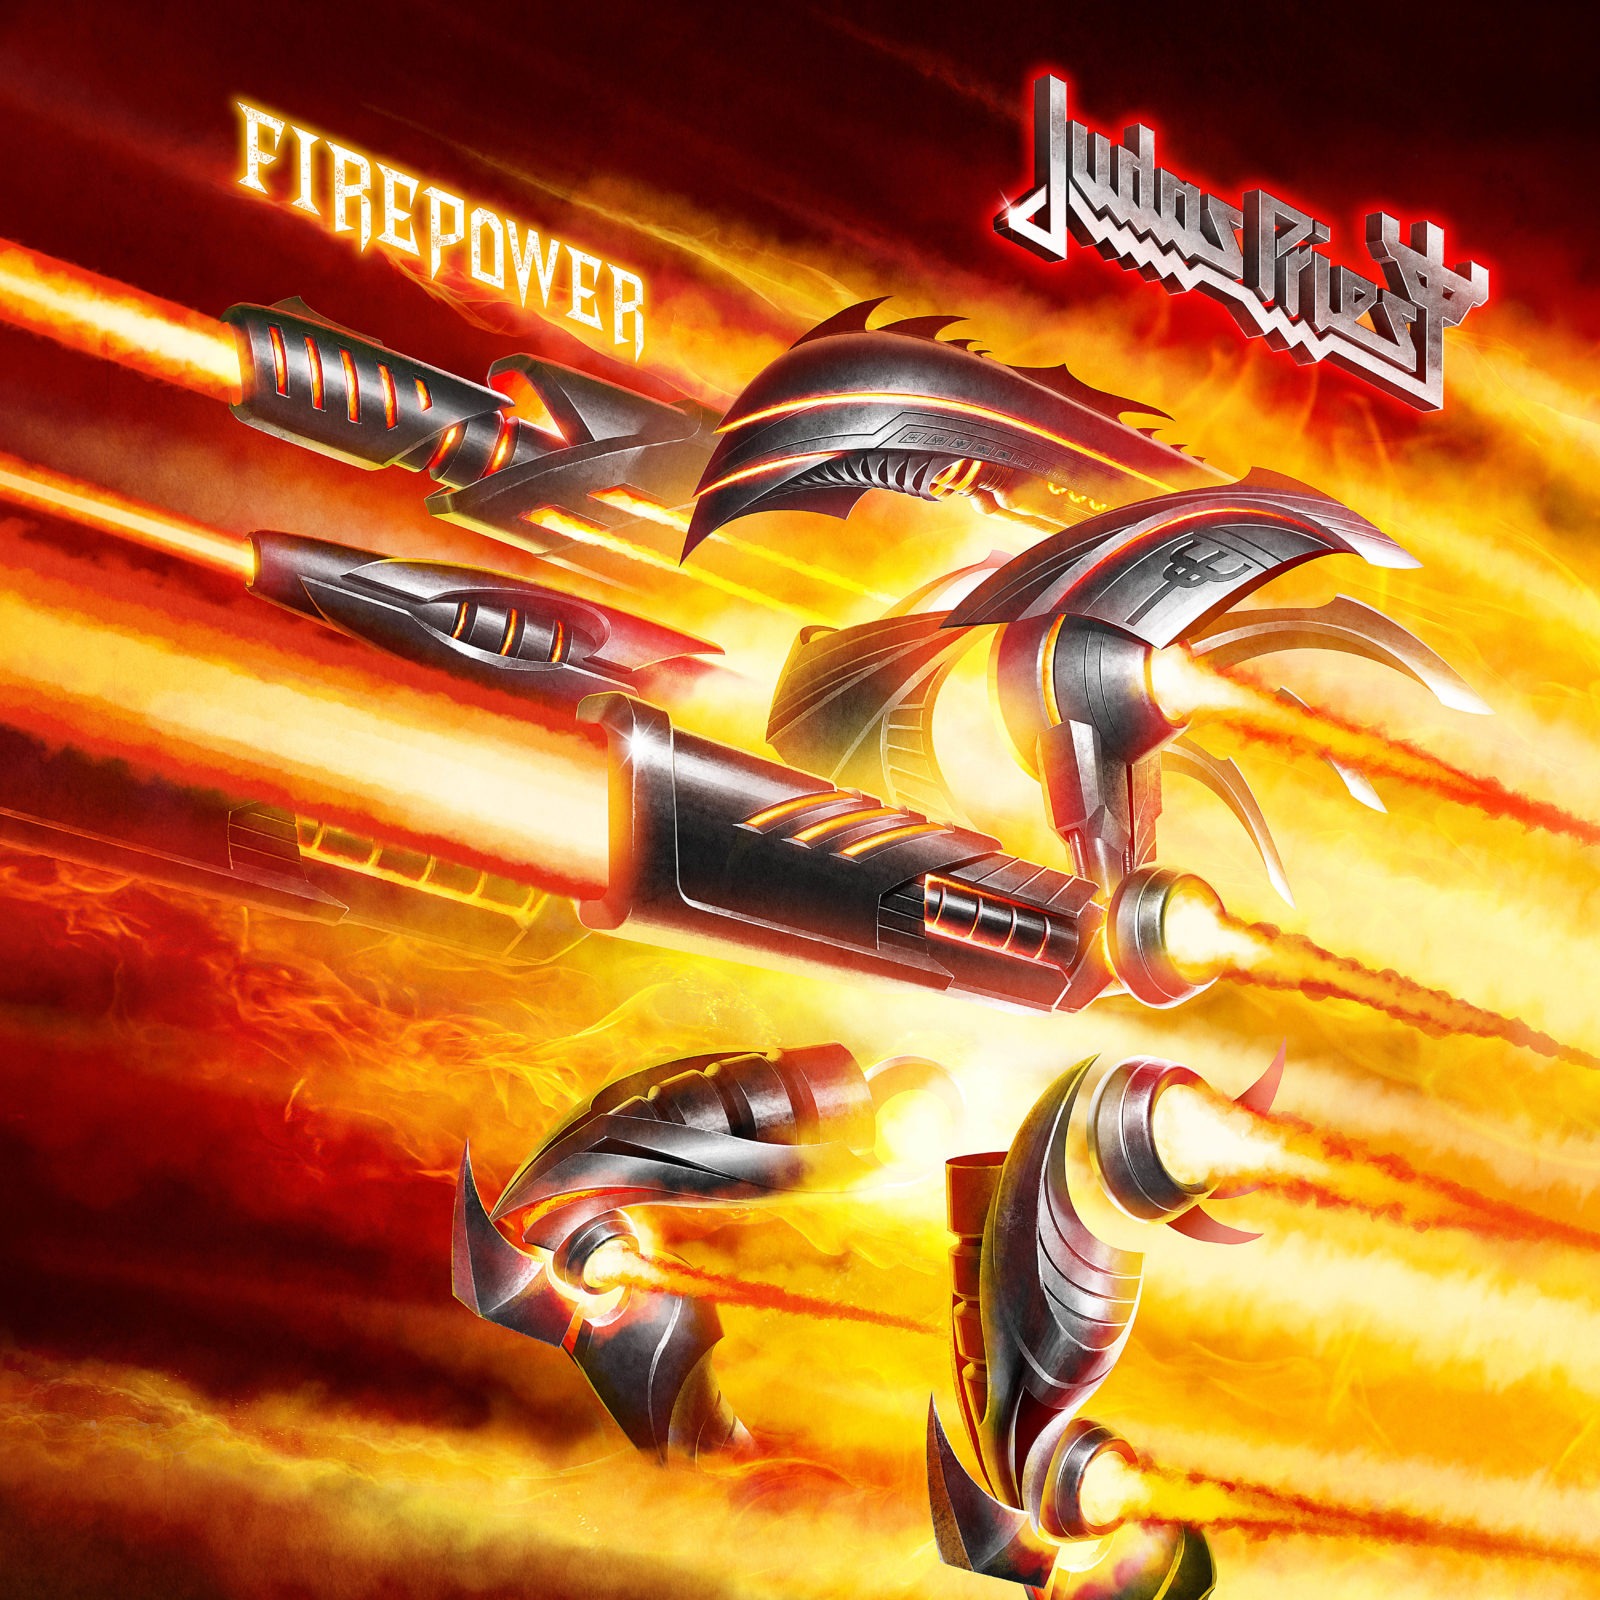 JUDAS PRIEST UNLEASH NEW SONG & LYRIC VIDEO, ANNOUNCE NYC SIGNING